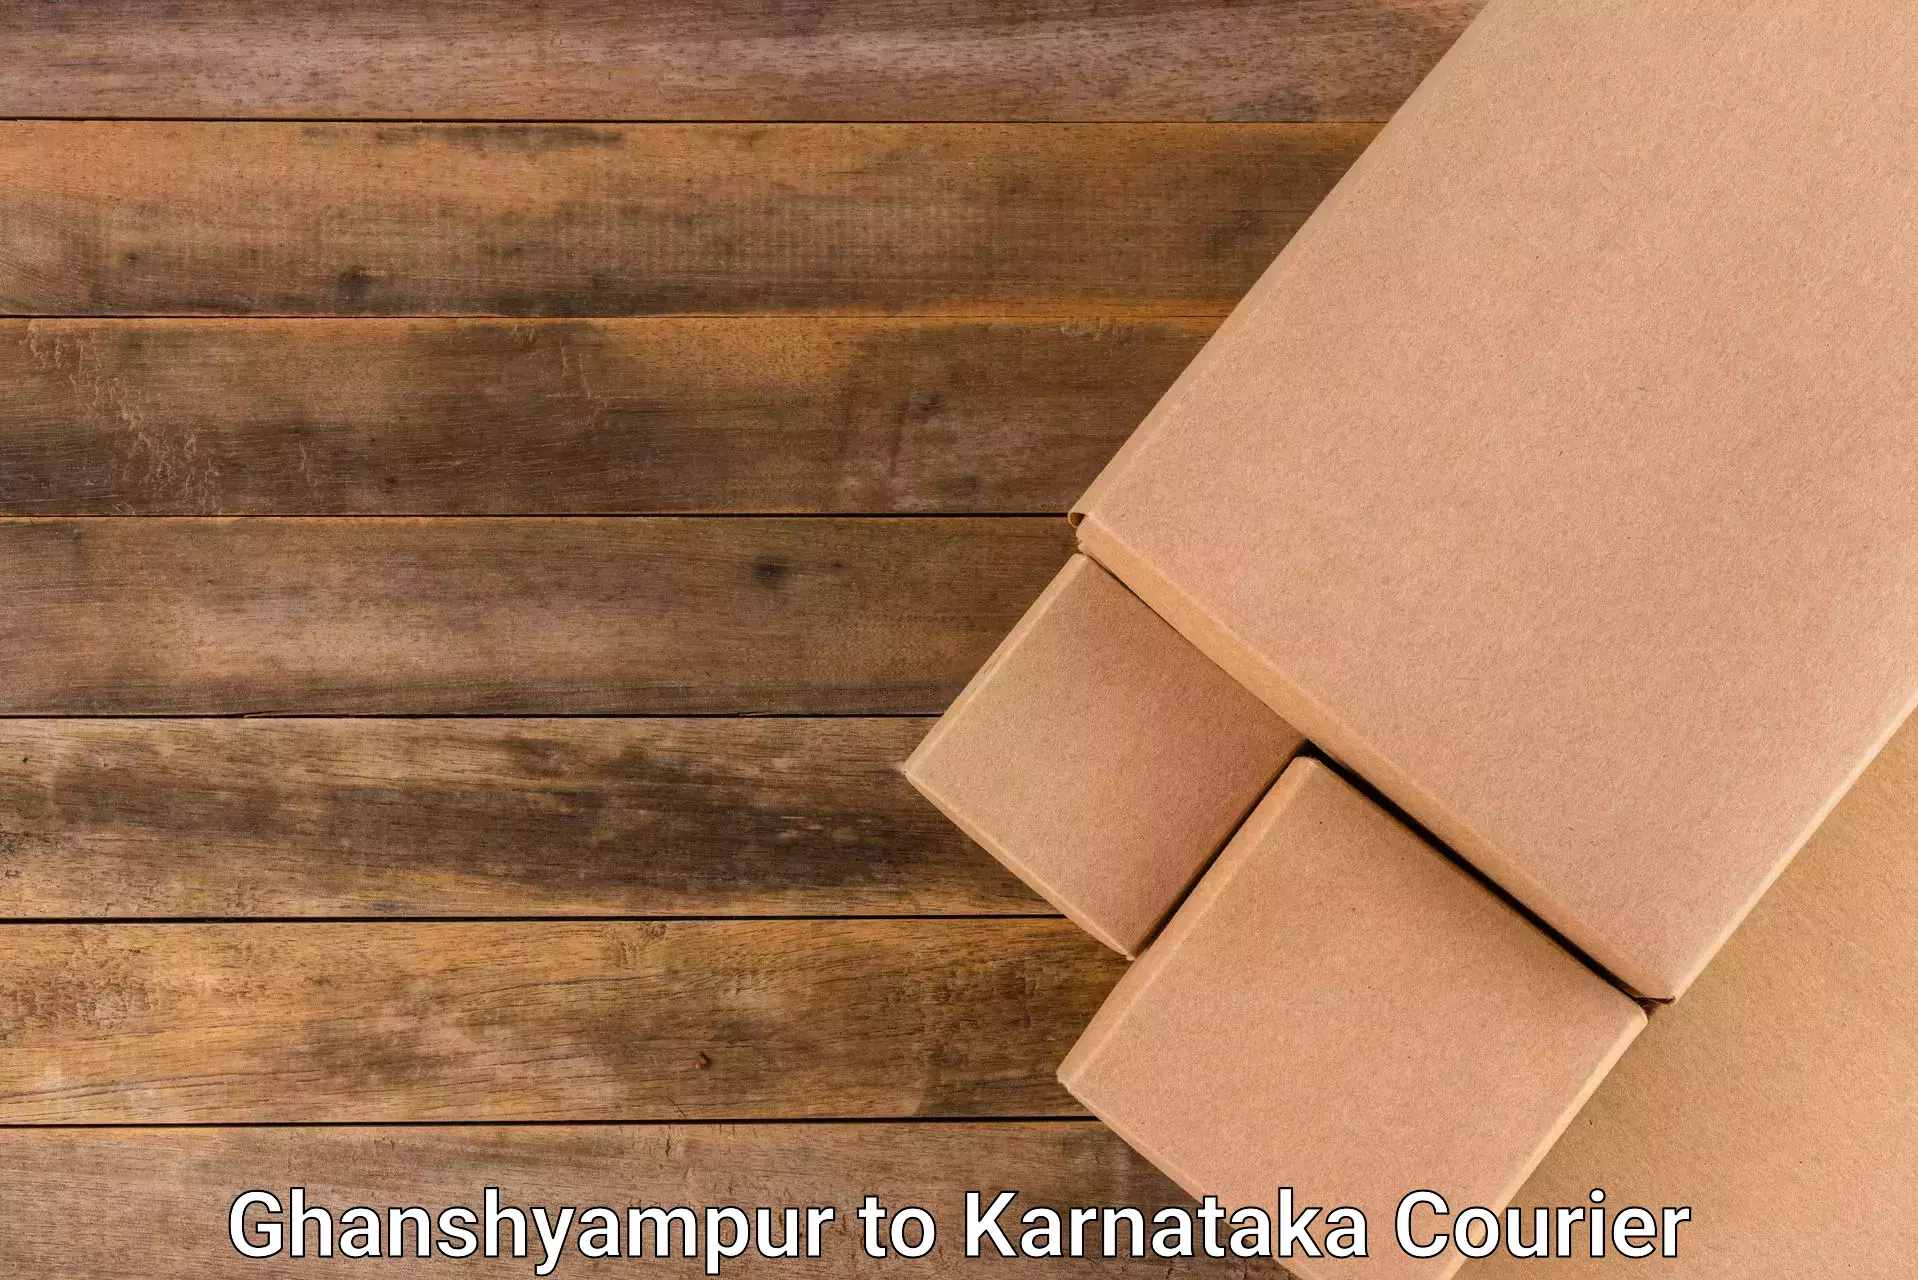 Advanced courier platforms Ghanshyampur to Tumkur